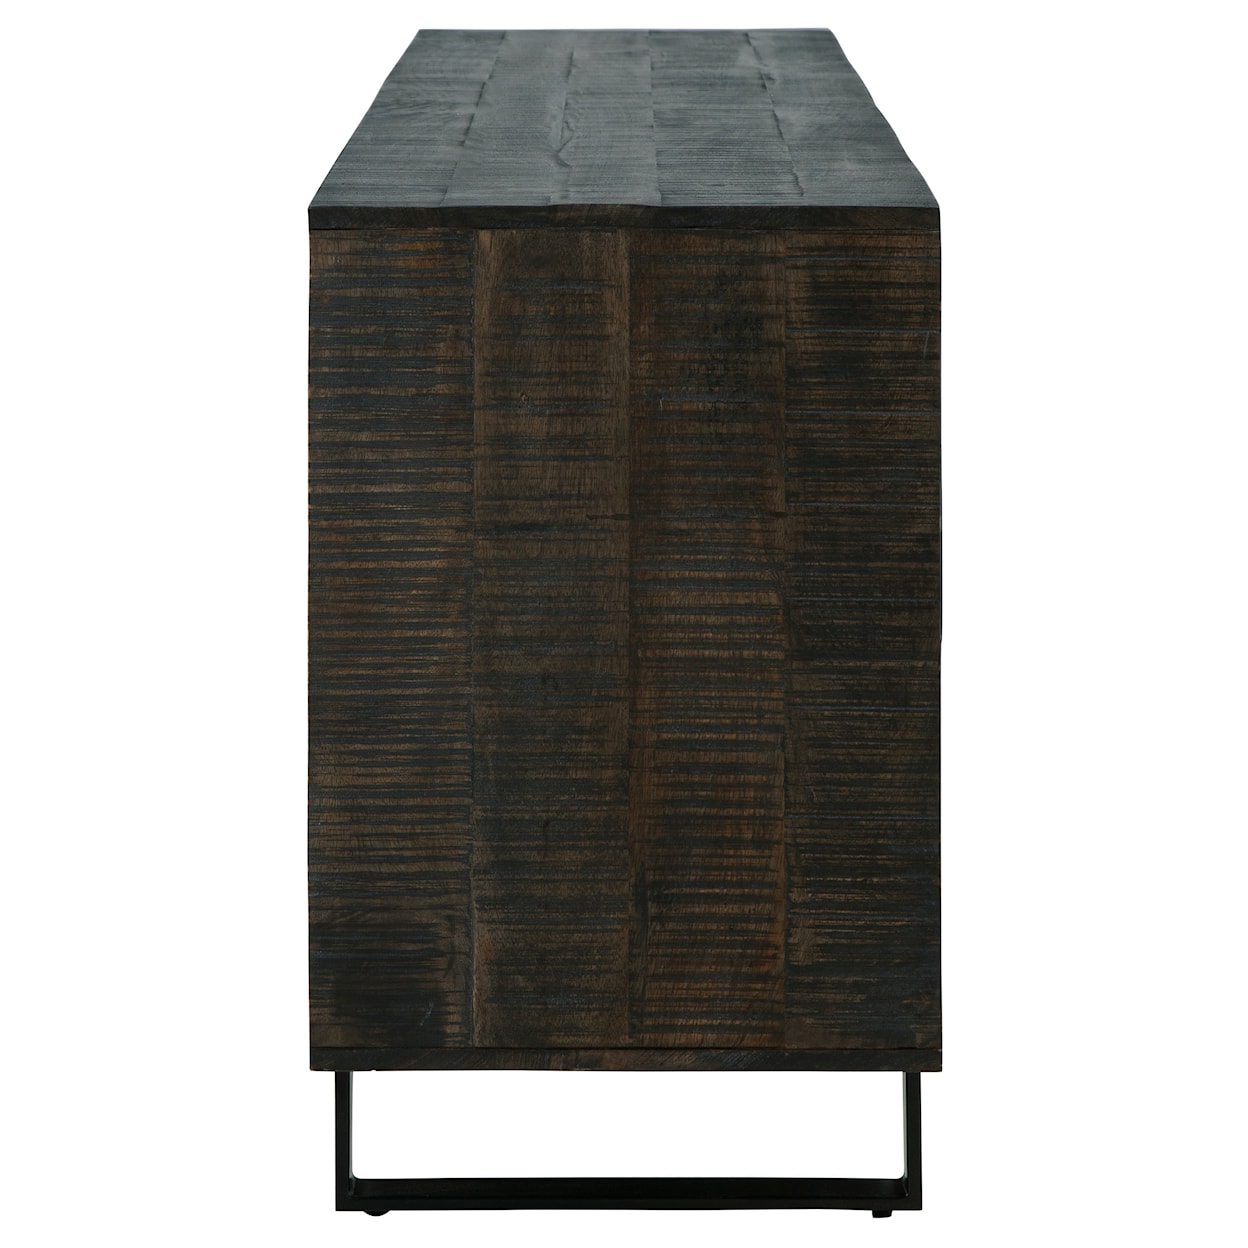 Signature Design by Ashley Kevmart Accent Cabinet